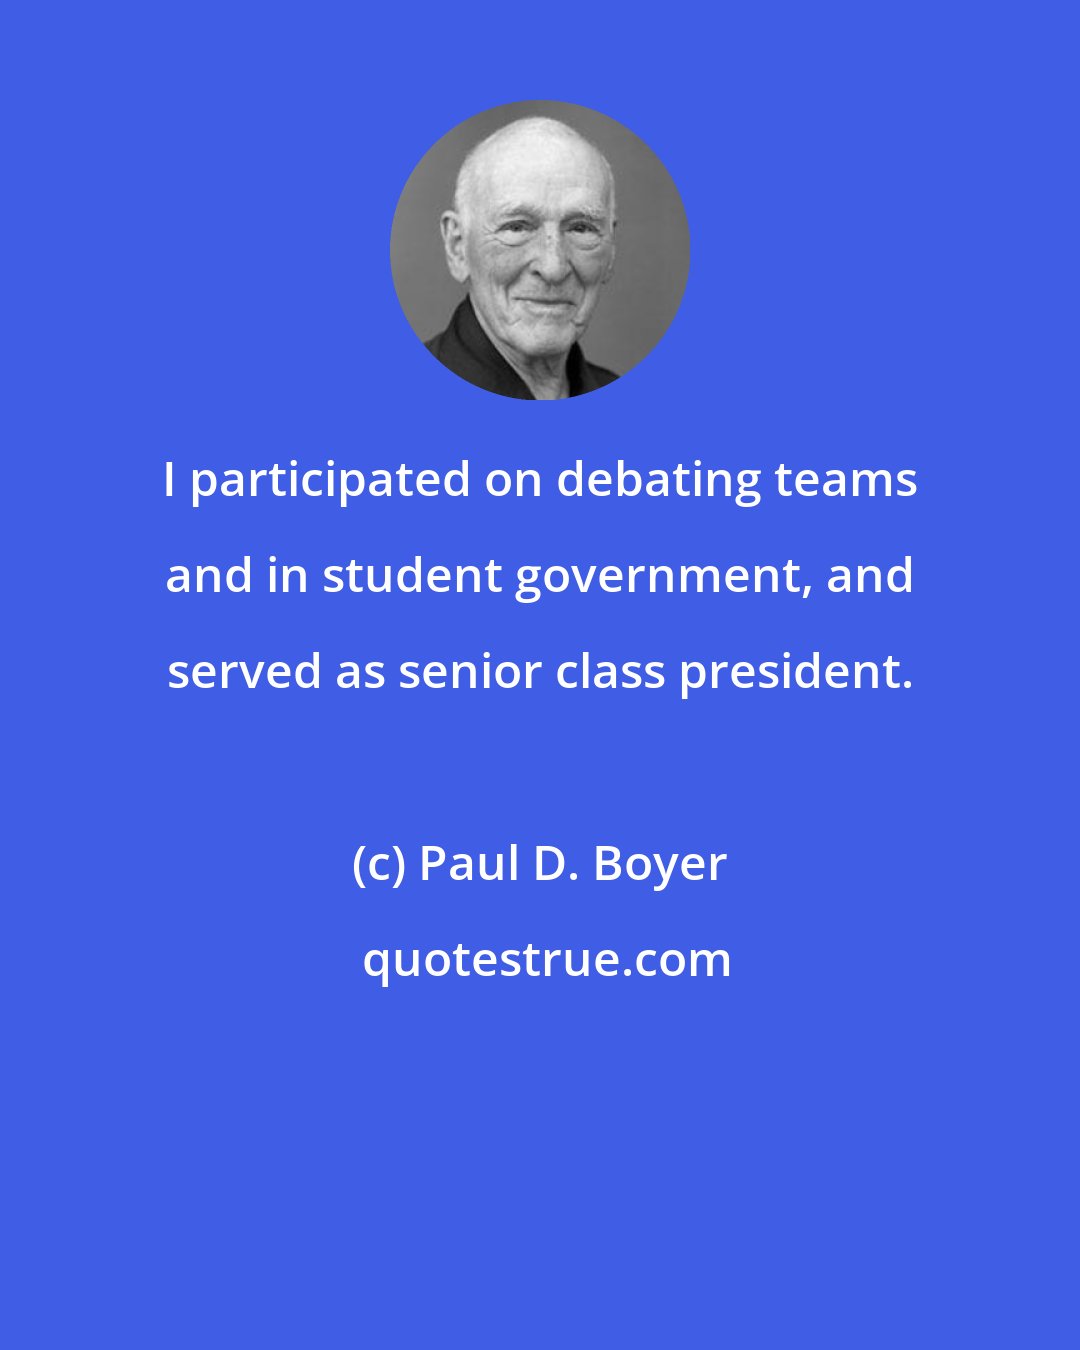 Paul D. Boyer: I participated on debating teams and in student government, and served as senior class president.